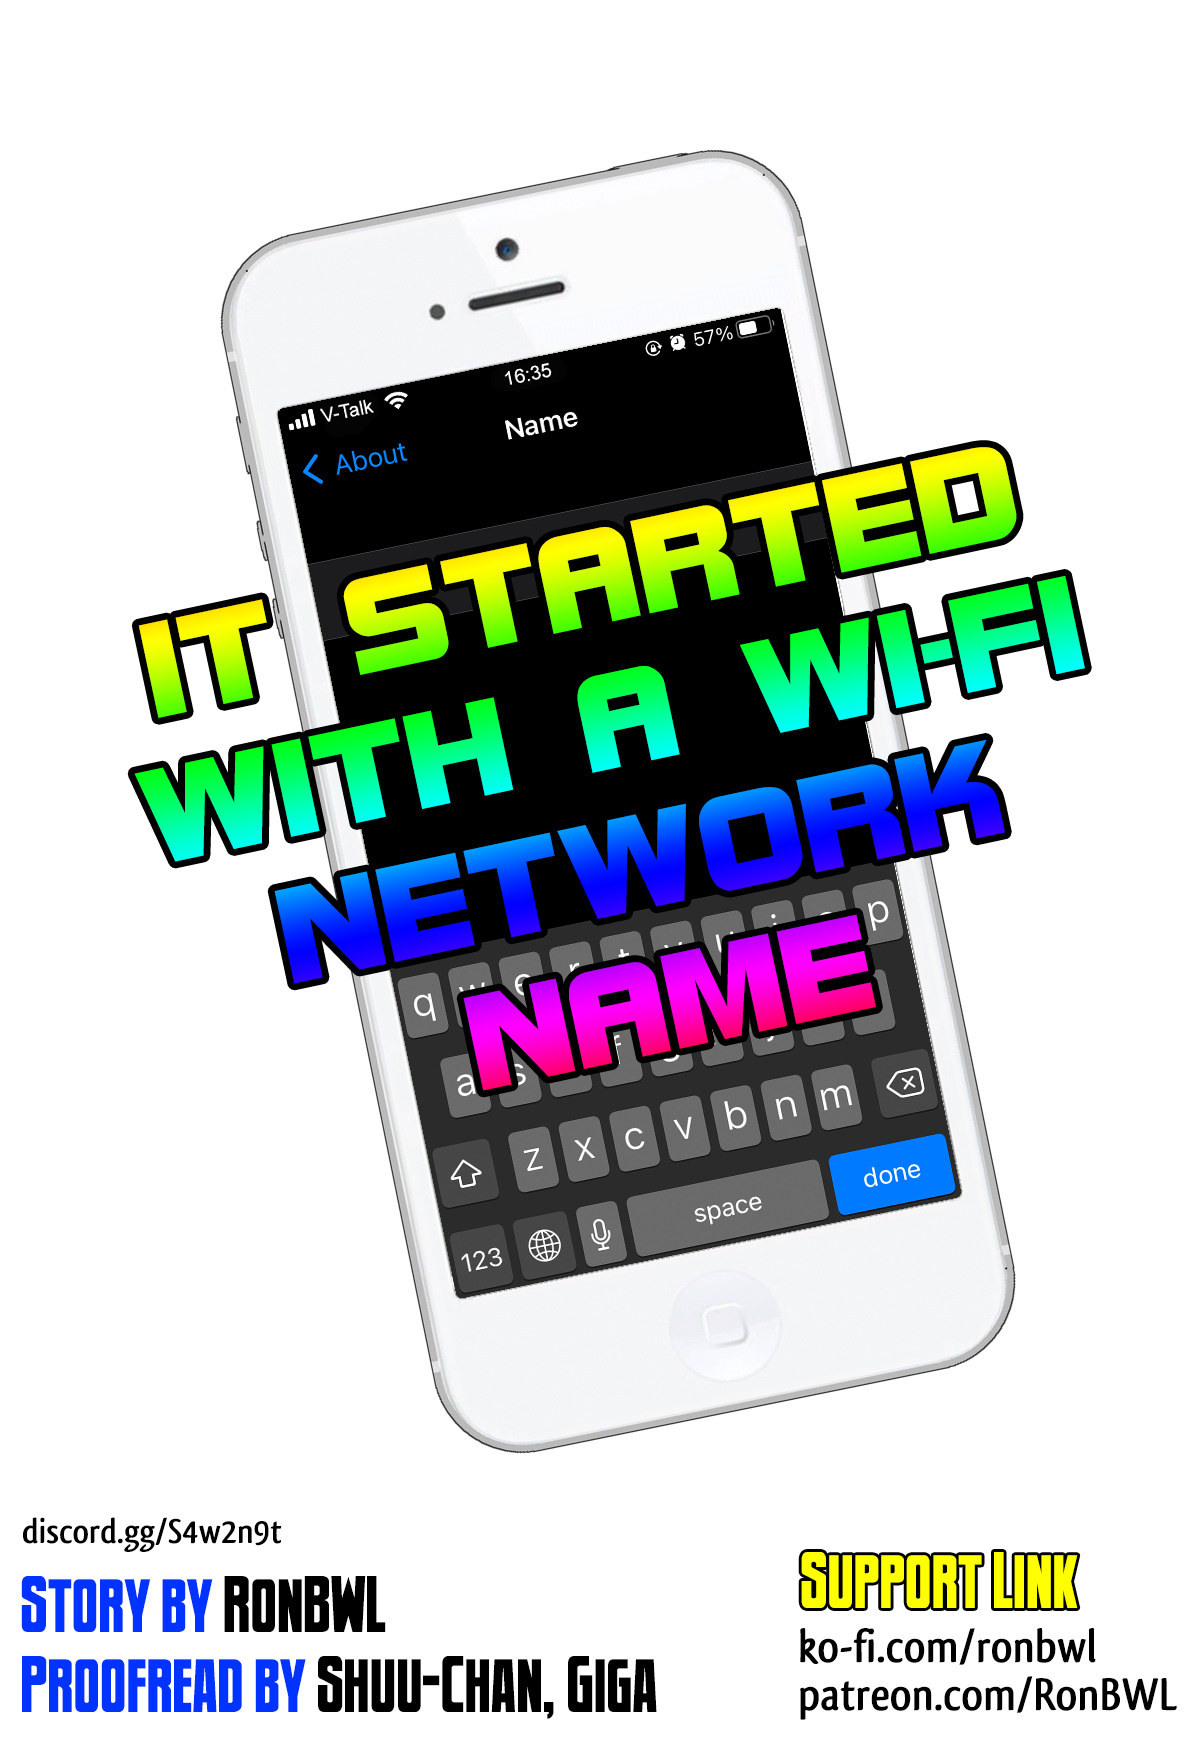 It started with a Wi-Fi network name 26